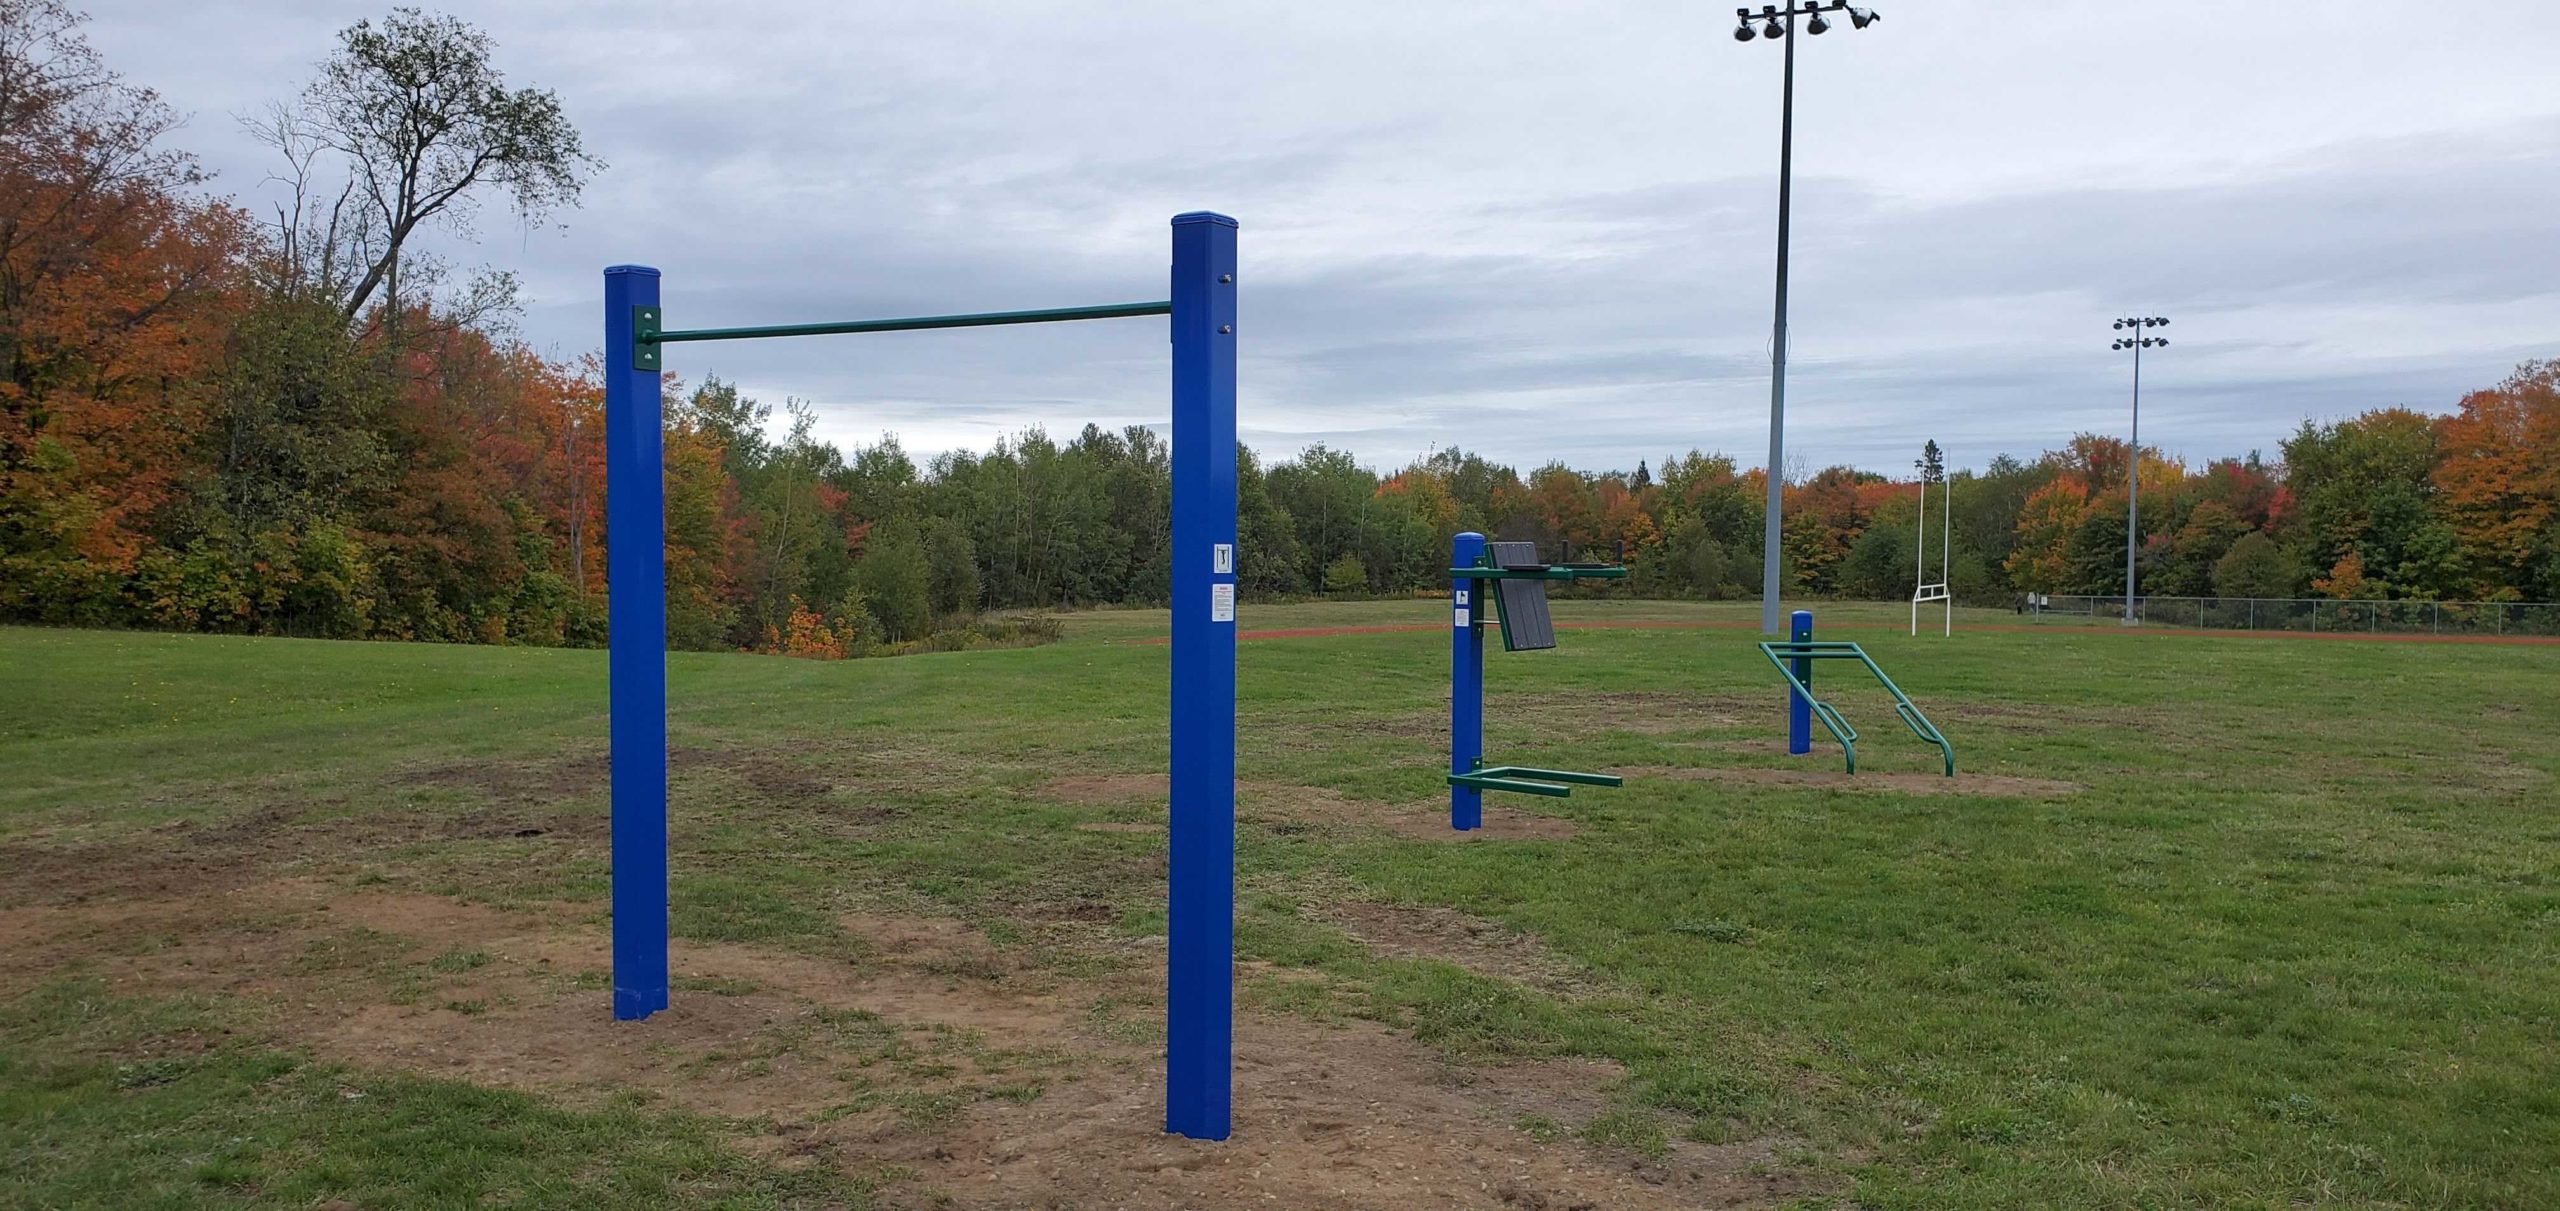 StayFit systems installation at Canadian Armed Forces Base 37